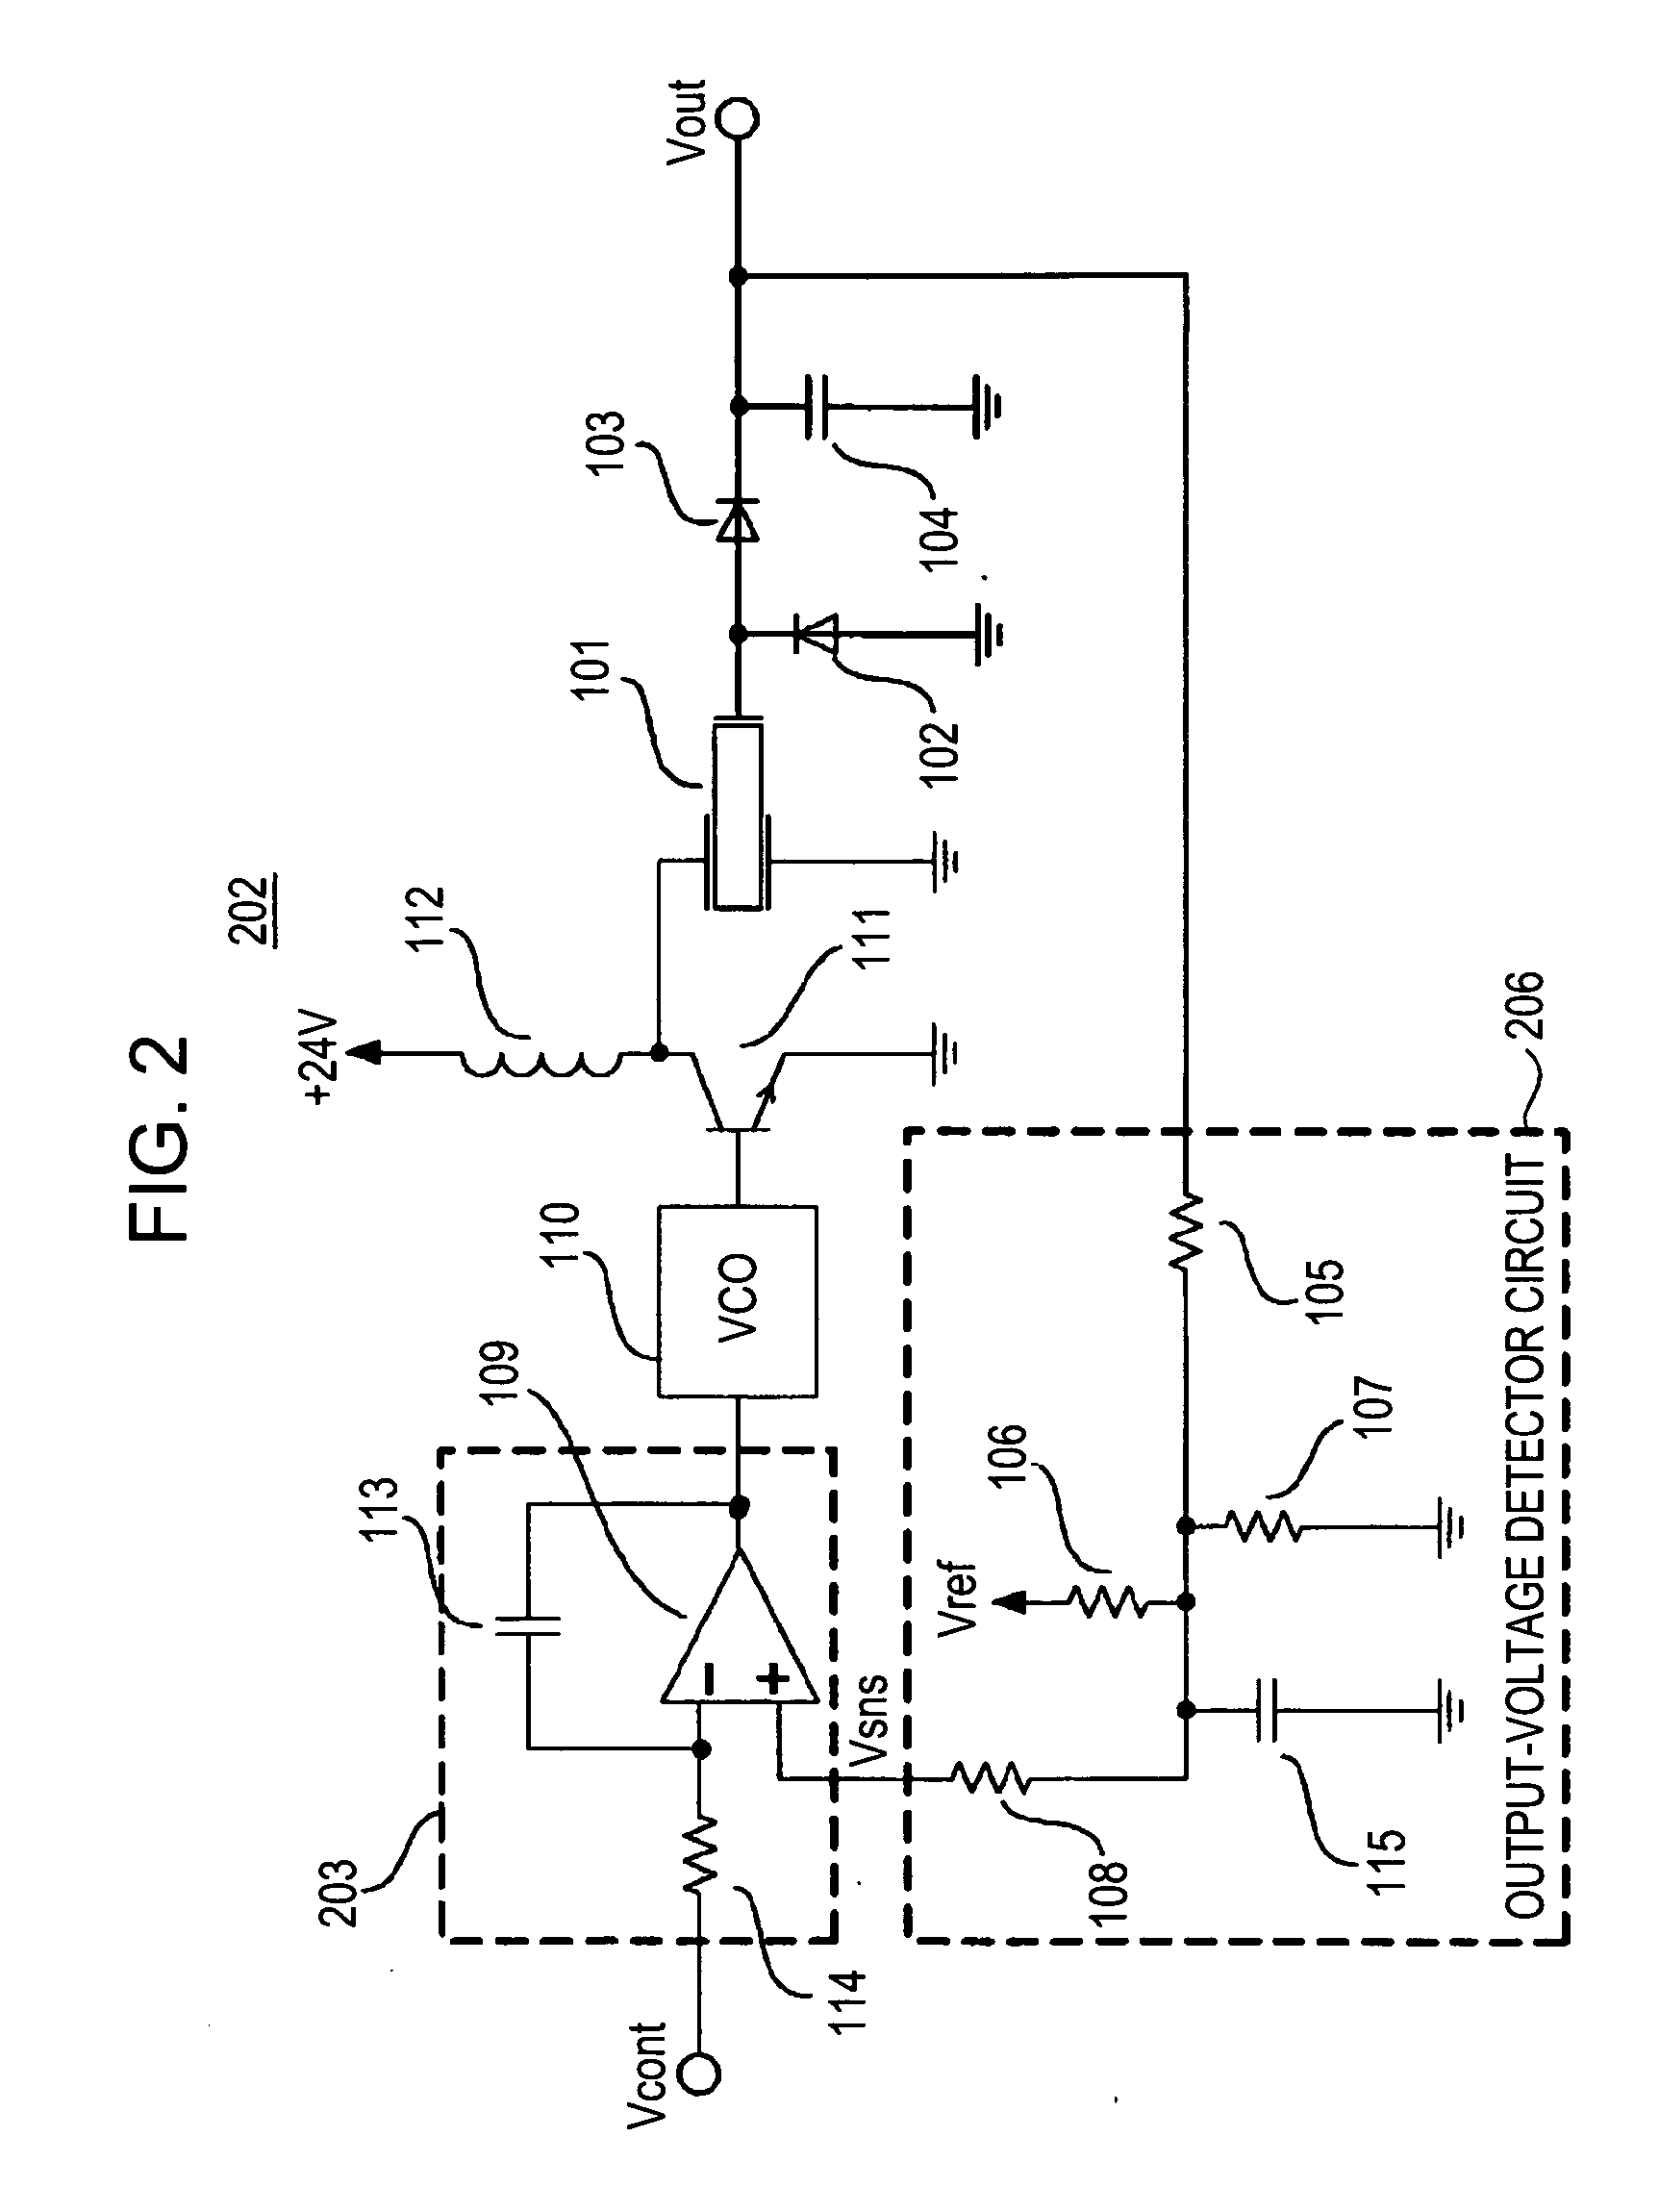 Image forming apparatus utilizing a piezoelectric-transformer high-voltage power supply and method for controlling the same